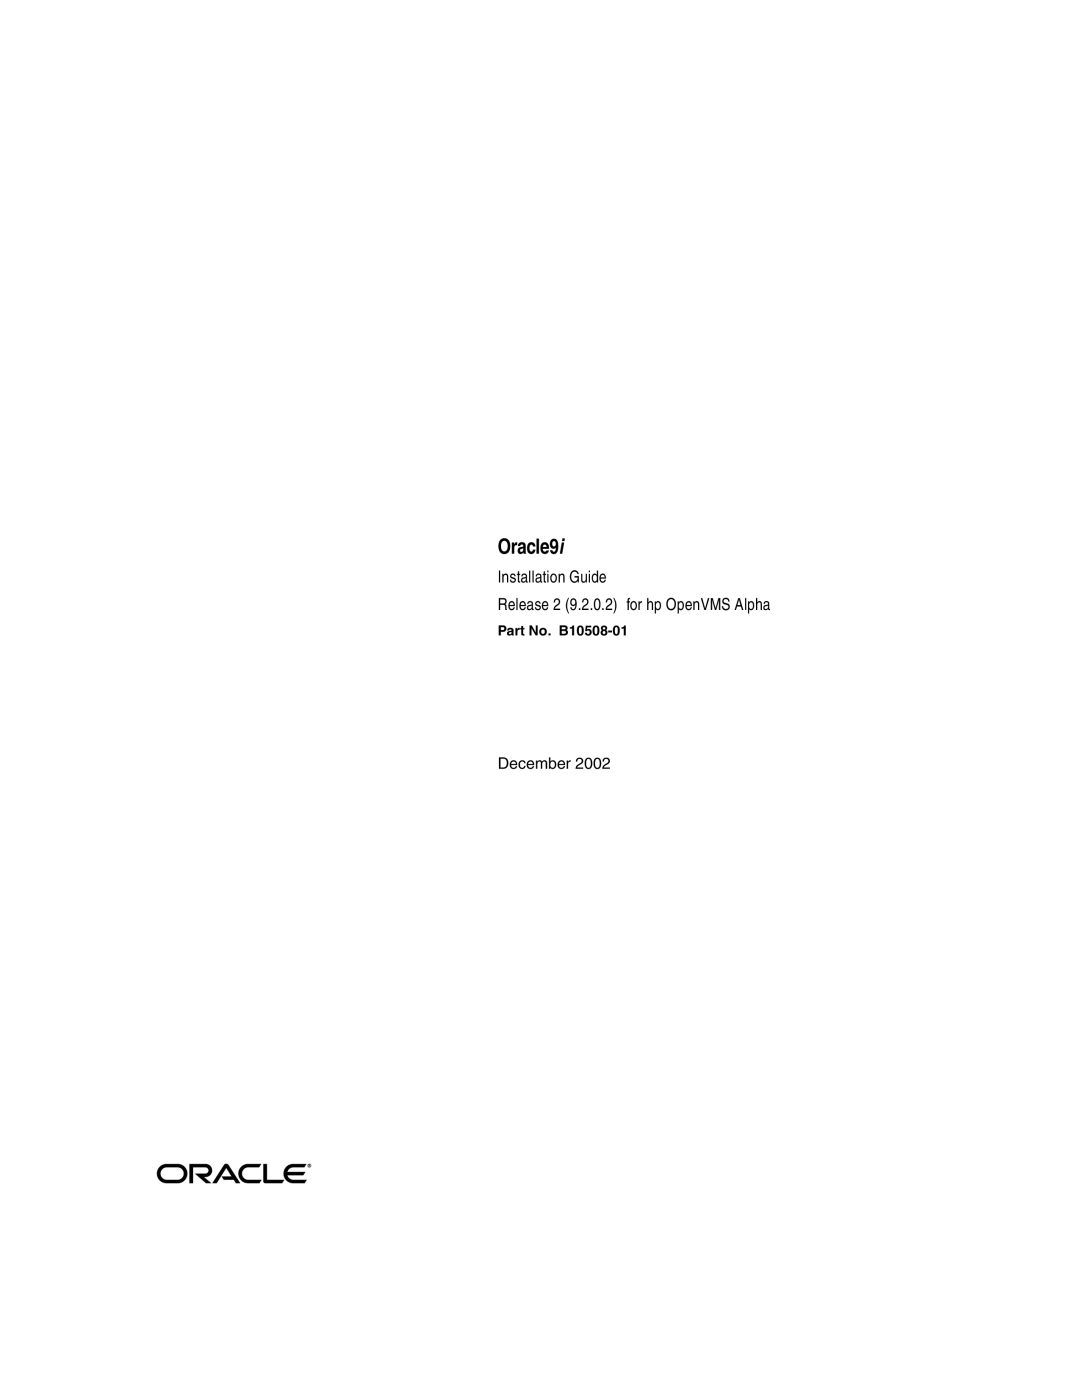 Oracle Audio Technologies B10508-01 manual Oracle9i, Installation Guide Release 2 9.2.0.2 for hp OpenVMS Alpha 